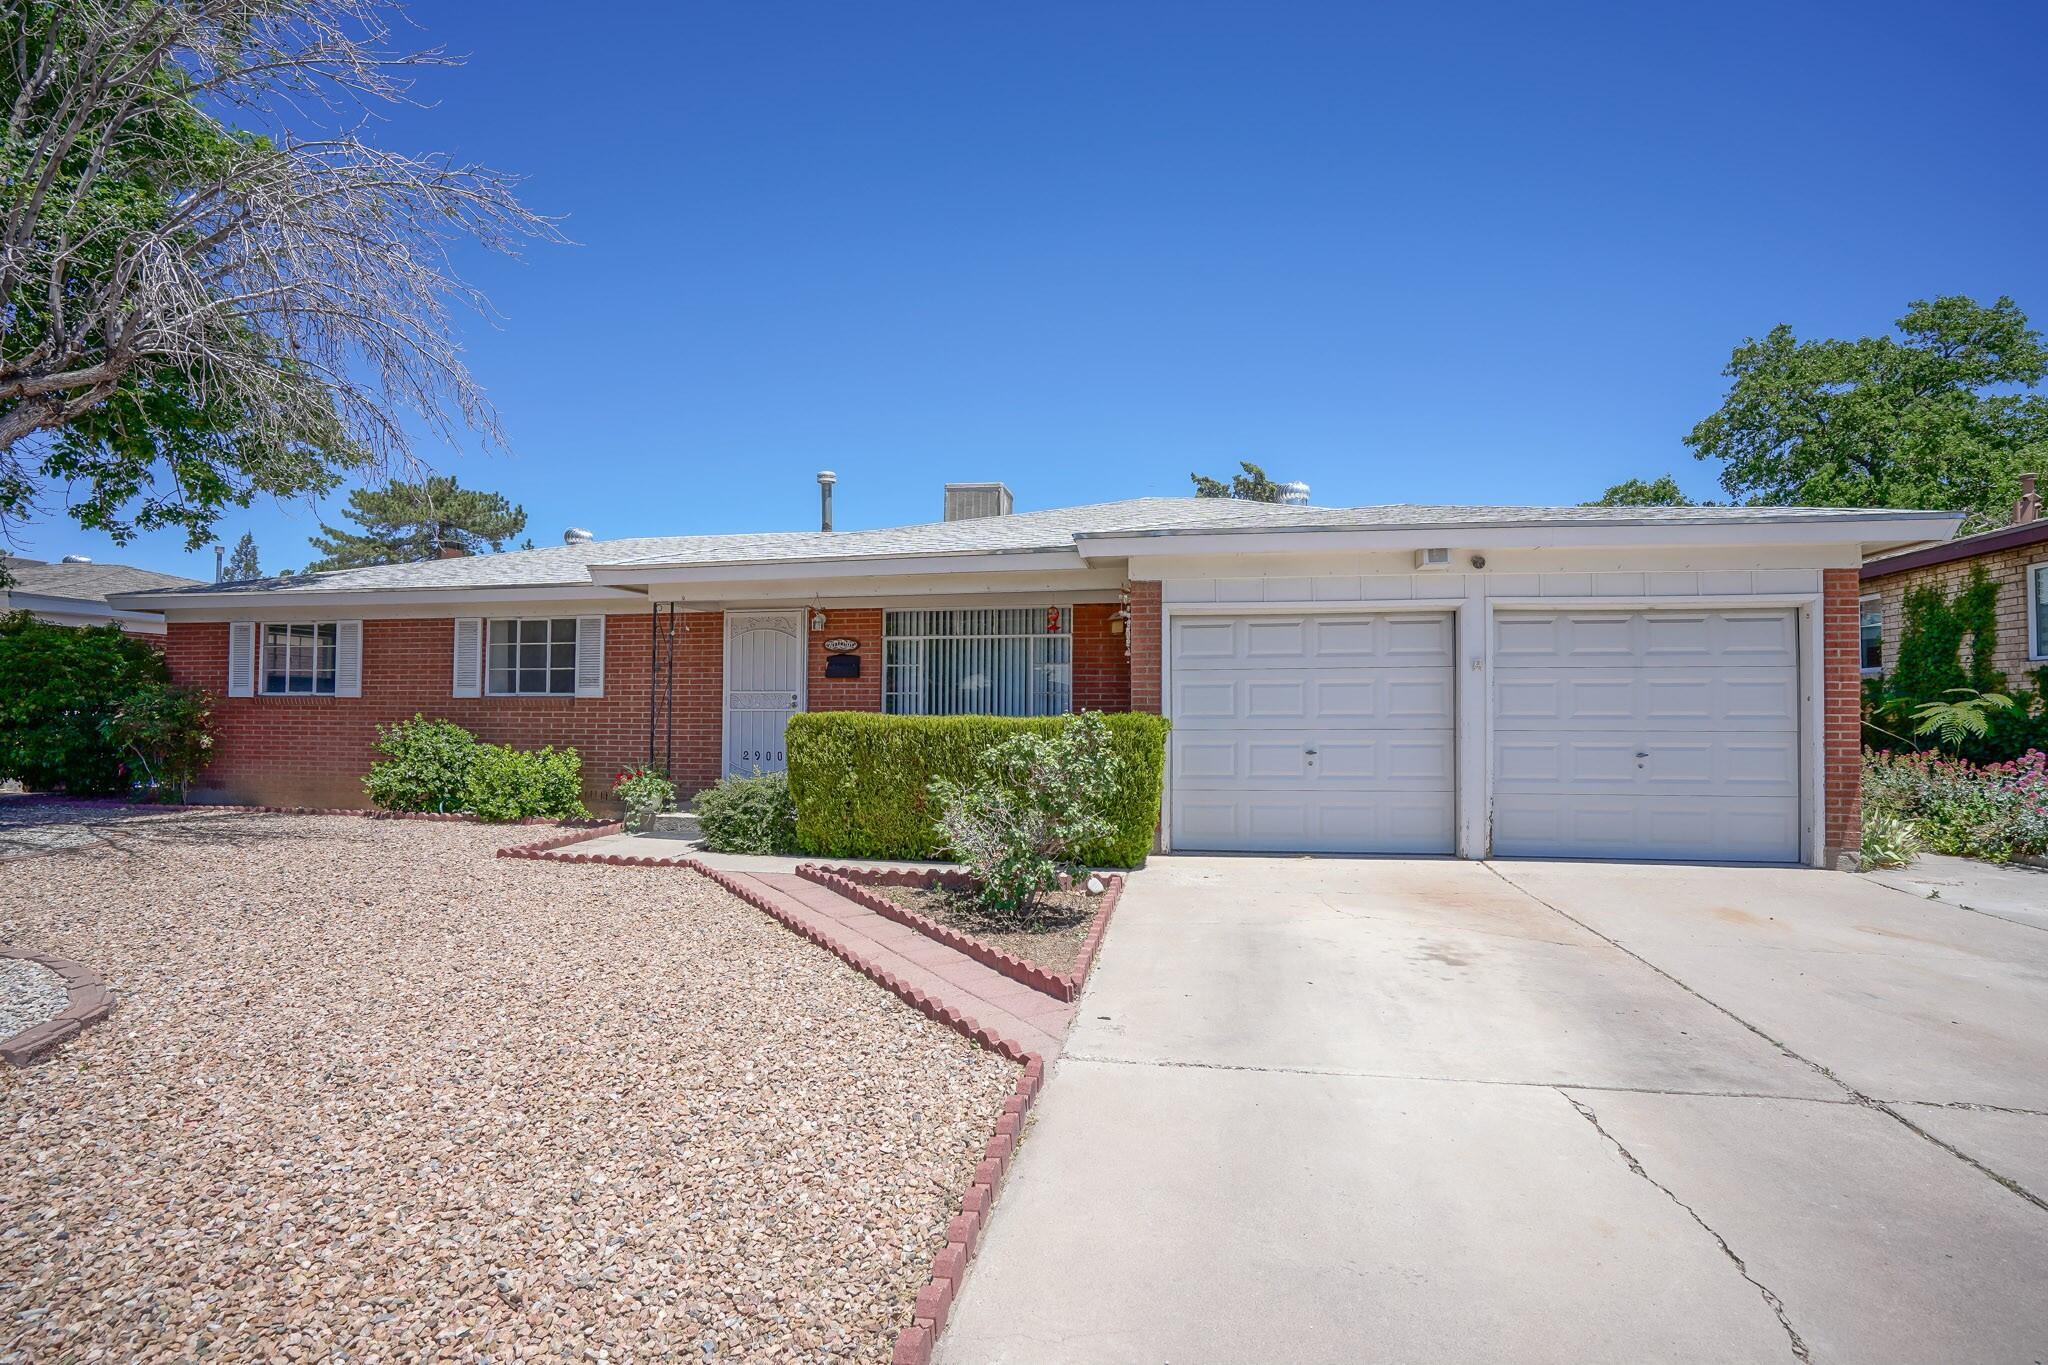 Wonderful Sandia High School district home.  Brick, pictched Wood floors .22 acre Walled Backyard. Freshly painted , new outlets wonderful potential on the upside.  Large two Car garage plus Shed in back, newer pitched roof.Well landscaped in front with low maintenance low water use  Backyard is private and wonderful.